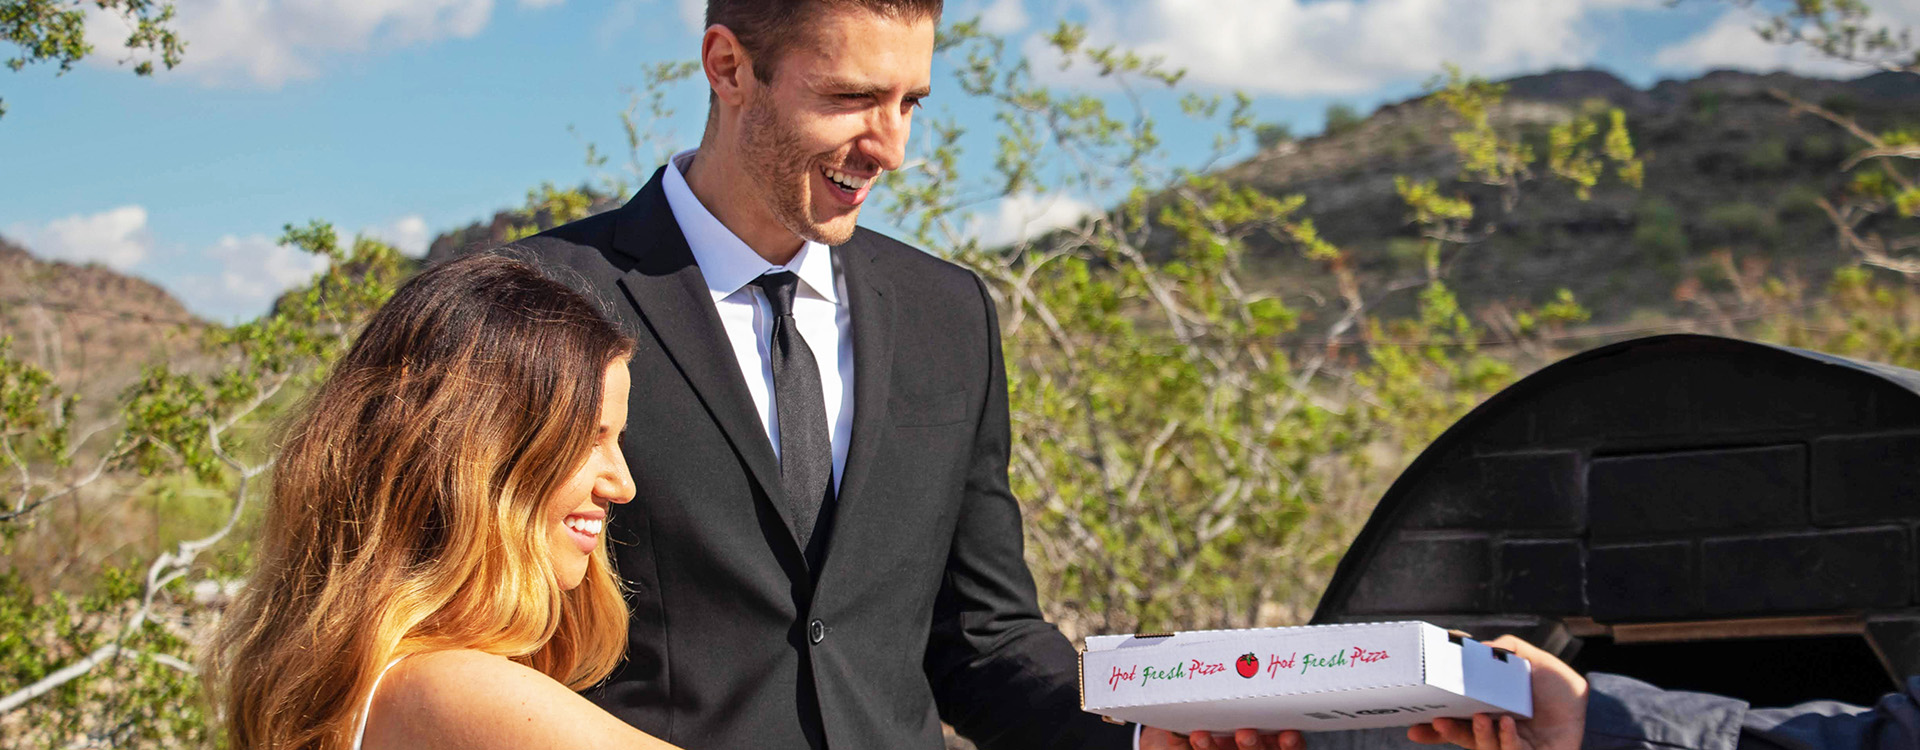 A man holding a pizza box next to his bride